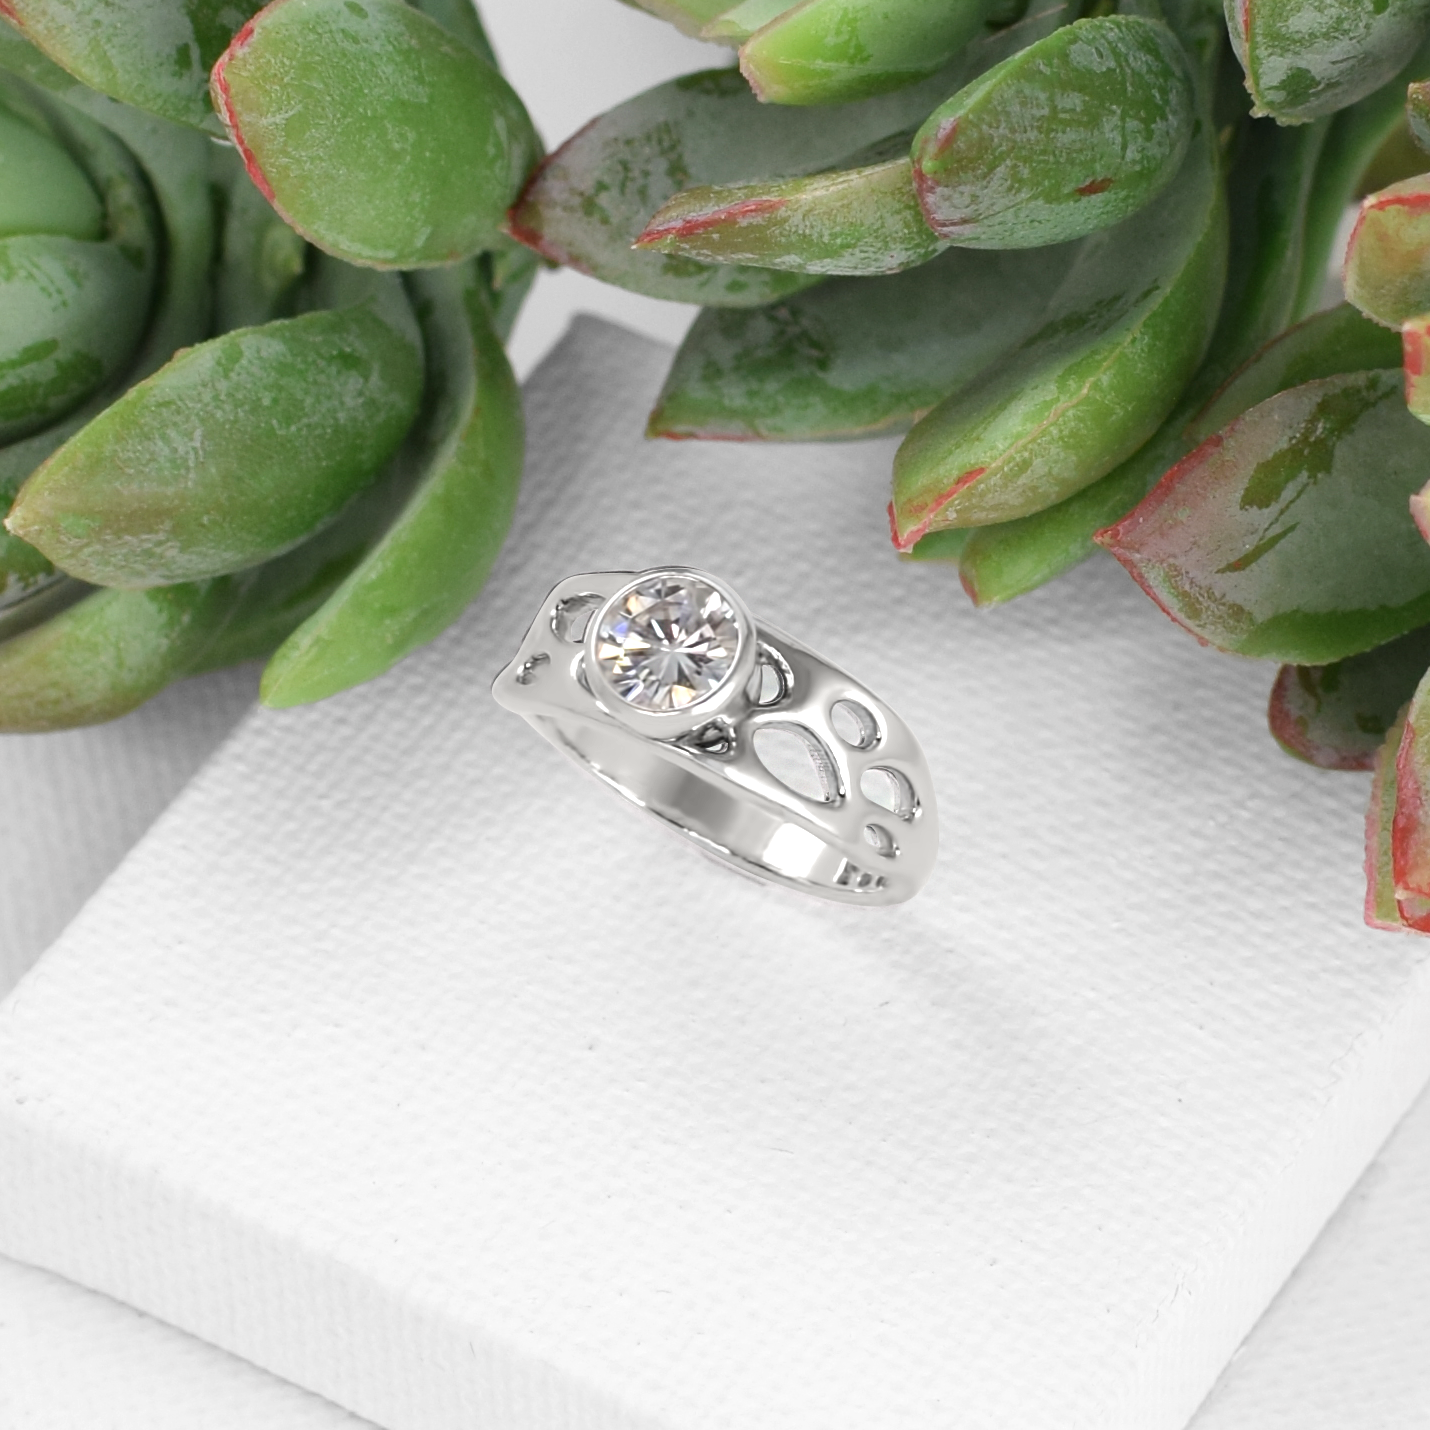 silver non-traditional engagement ring on white background with cactus